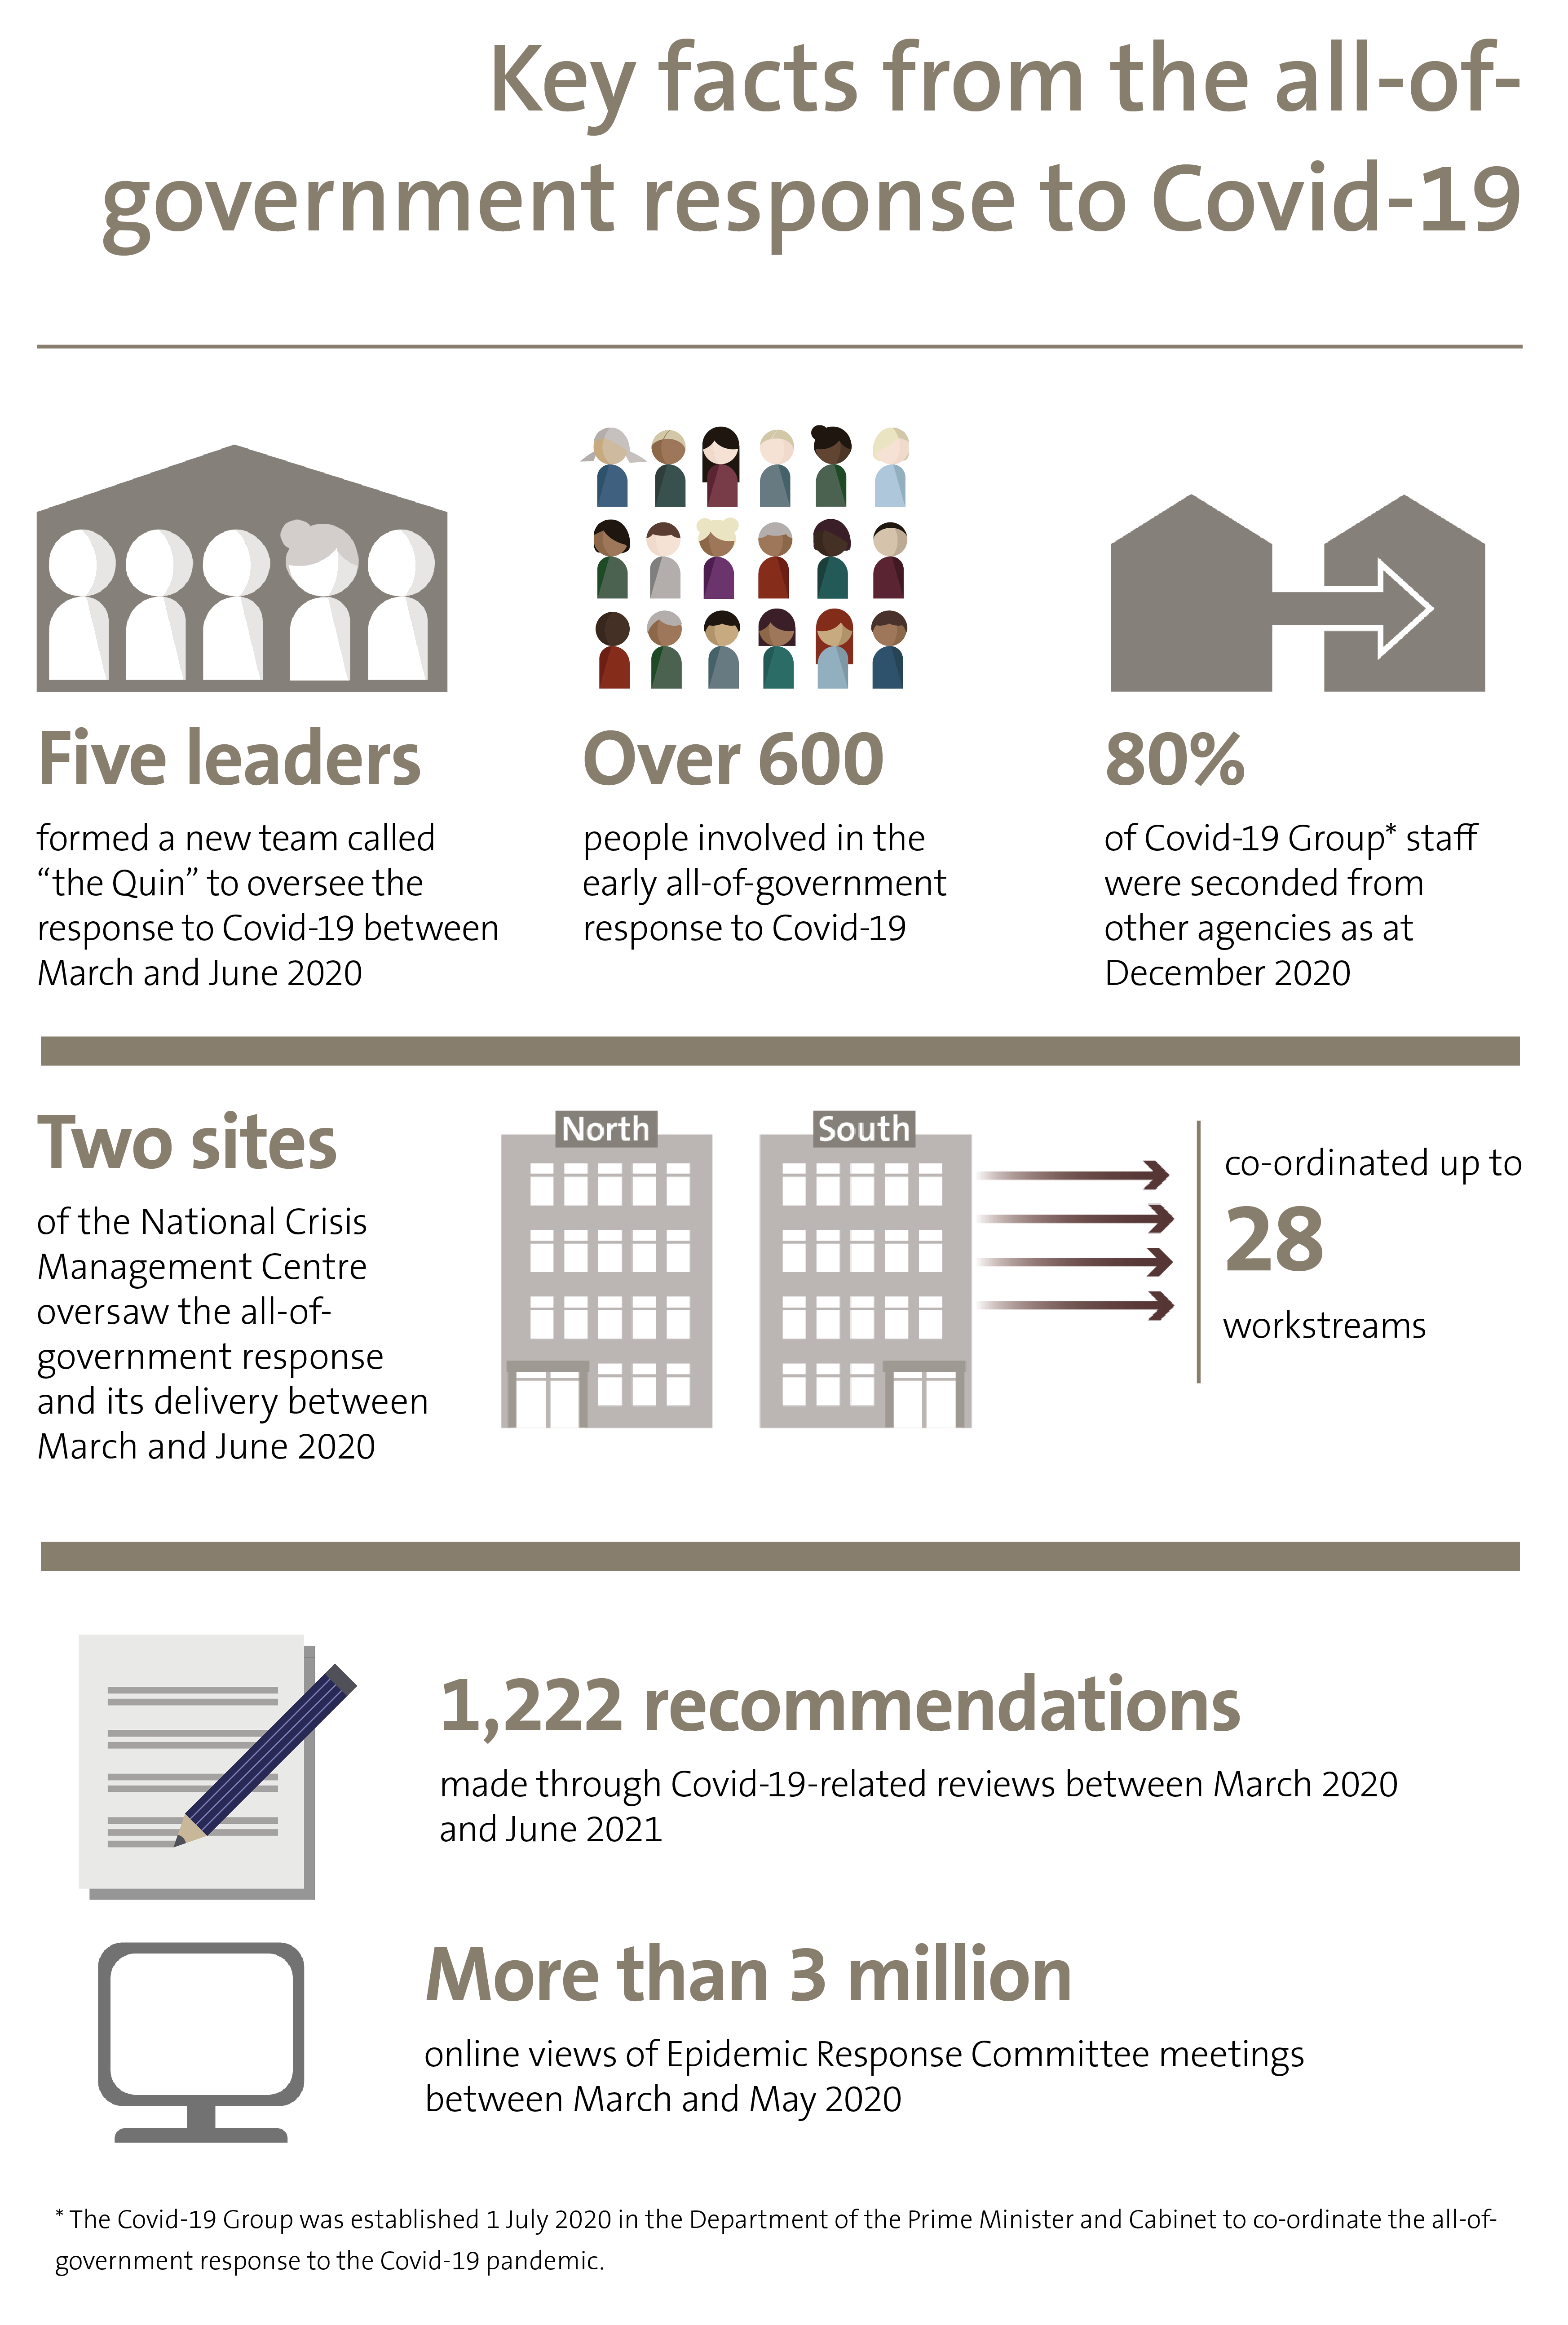 Key facts from the all-of-government response to Covid-19